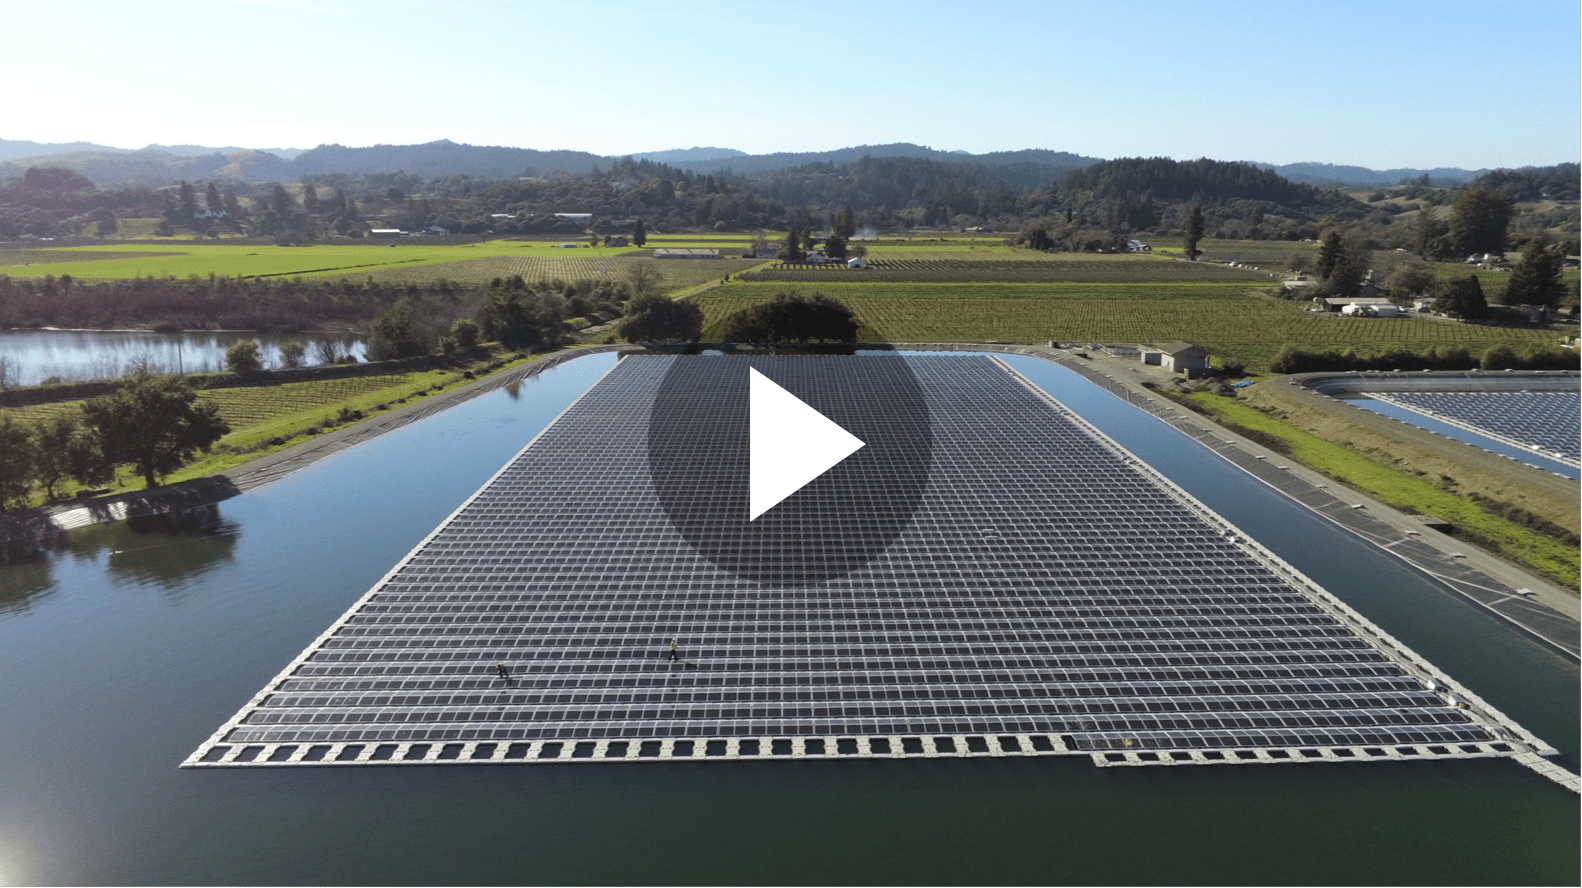 Thumbnail of a birdseye view of a solar farm floating on water with mountains in background.